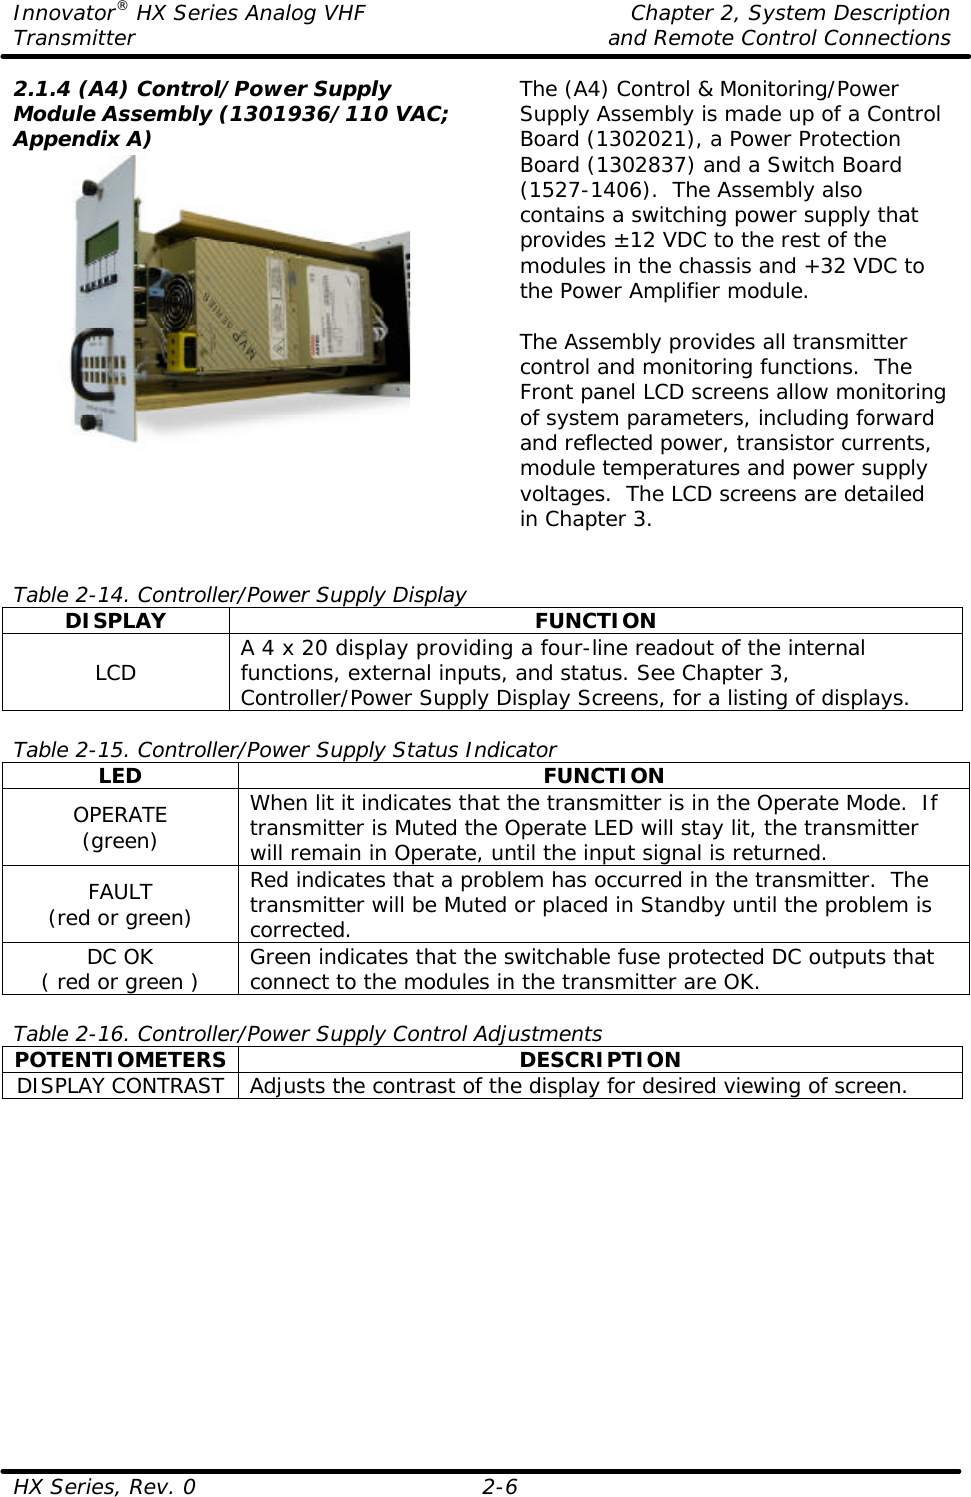 Innovator® HX Series Analog VHF    Chapter 2, System Description Transmitter    and Remote Control Connections  HX Series, Rev. 0 2-6 2.1.4 (A4) Control/Power Supply Module Assembly (1301936/110 VAC; Appendix A)  The (A4) Control &amp; Monitoring/Power Supply Assembly is made up of a Control Board (1302021), a Power Protection Board (1302837) and a Switch Board (1527-1406).  The Assembly also contains a switching power supply that provides ±12 VDC to the rest of the modules in the chassis and +32 VDC to the Power Amplifier module.  The Assembly provides all transmitter control and monitoring functions.  The Front panel LCD screens allow monitoring of system parameters, including forward and reflected power, transistor currents, module temperatures and power supply voltages.  The LCD screens are detailed in Chapter 3.   Table 2-14. Controller/Power Supply Display DISPLAY FUNCTION LCD A 4 x 20 display providing a four-line readout of the internal functions, external inputs, and status. See Chapter 3, Controller/Power Supply Display Screens, for a listing of displays.  Table 2-15. Controller/Power Supply Status Indicator LED FUNCTION OPERATE (green) When lit it indicates that the transmitter is in the Operate Mode.  If transmitter is Muted the Operate LED will stay lit, the transmitter will remain in Operate, until the input signal is returned. FAULT (red or green) Red indicates that a problem has occurred in the transmitter.  The transmitter will be Muted or placed in Standby until the problem is corrected. DC OK ( red or green ) Green indicates that the switchable fuse protected DC outputs that connect to the modules in the transmitter are OK.  Table 2-16. Controller/Power Supply Control Adjustments POTENTIOMETERS DESCRIPTION DISPLAY CONTRAST Adjusts the contrast of the display for desired viewing of screen.  